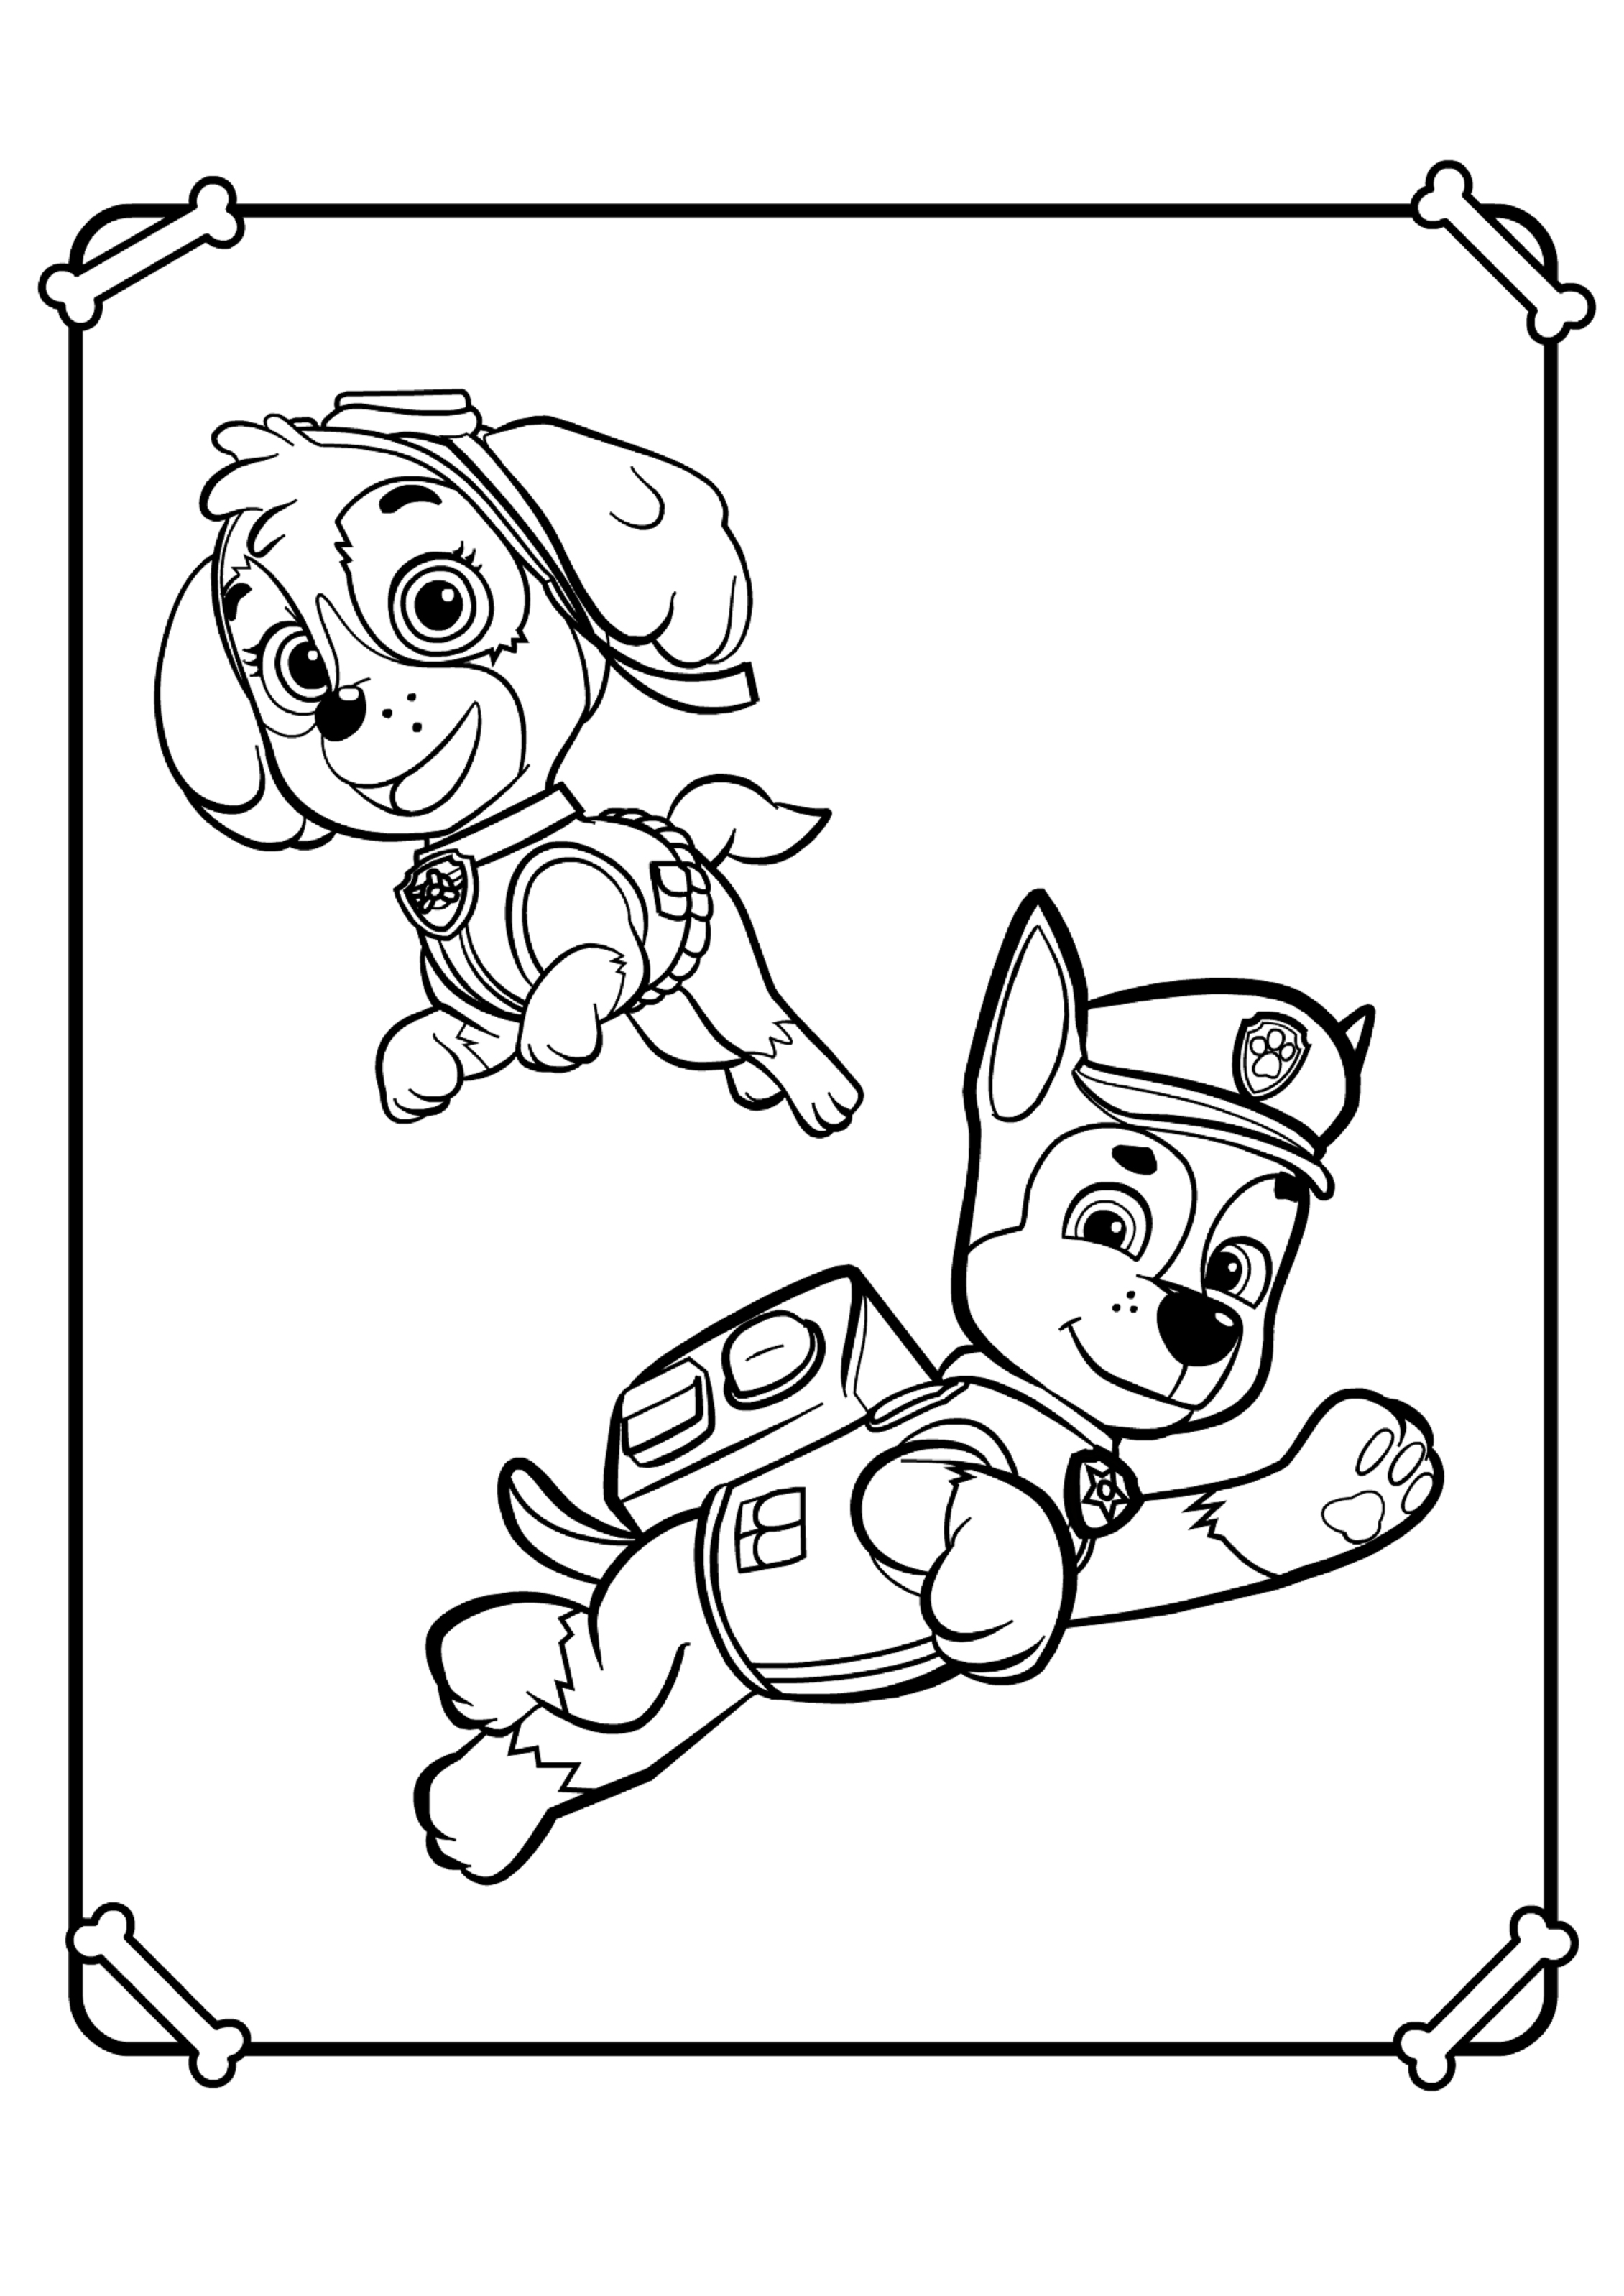 chase paw patrol coloring pages at getdrawings  free download